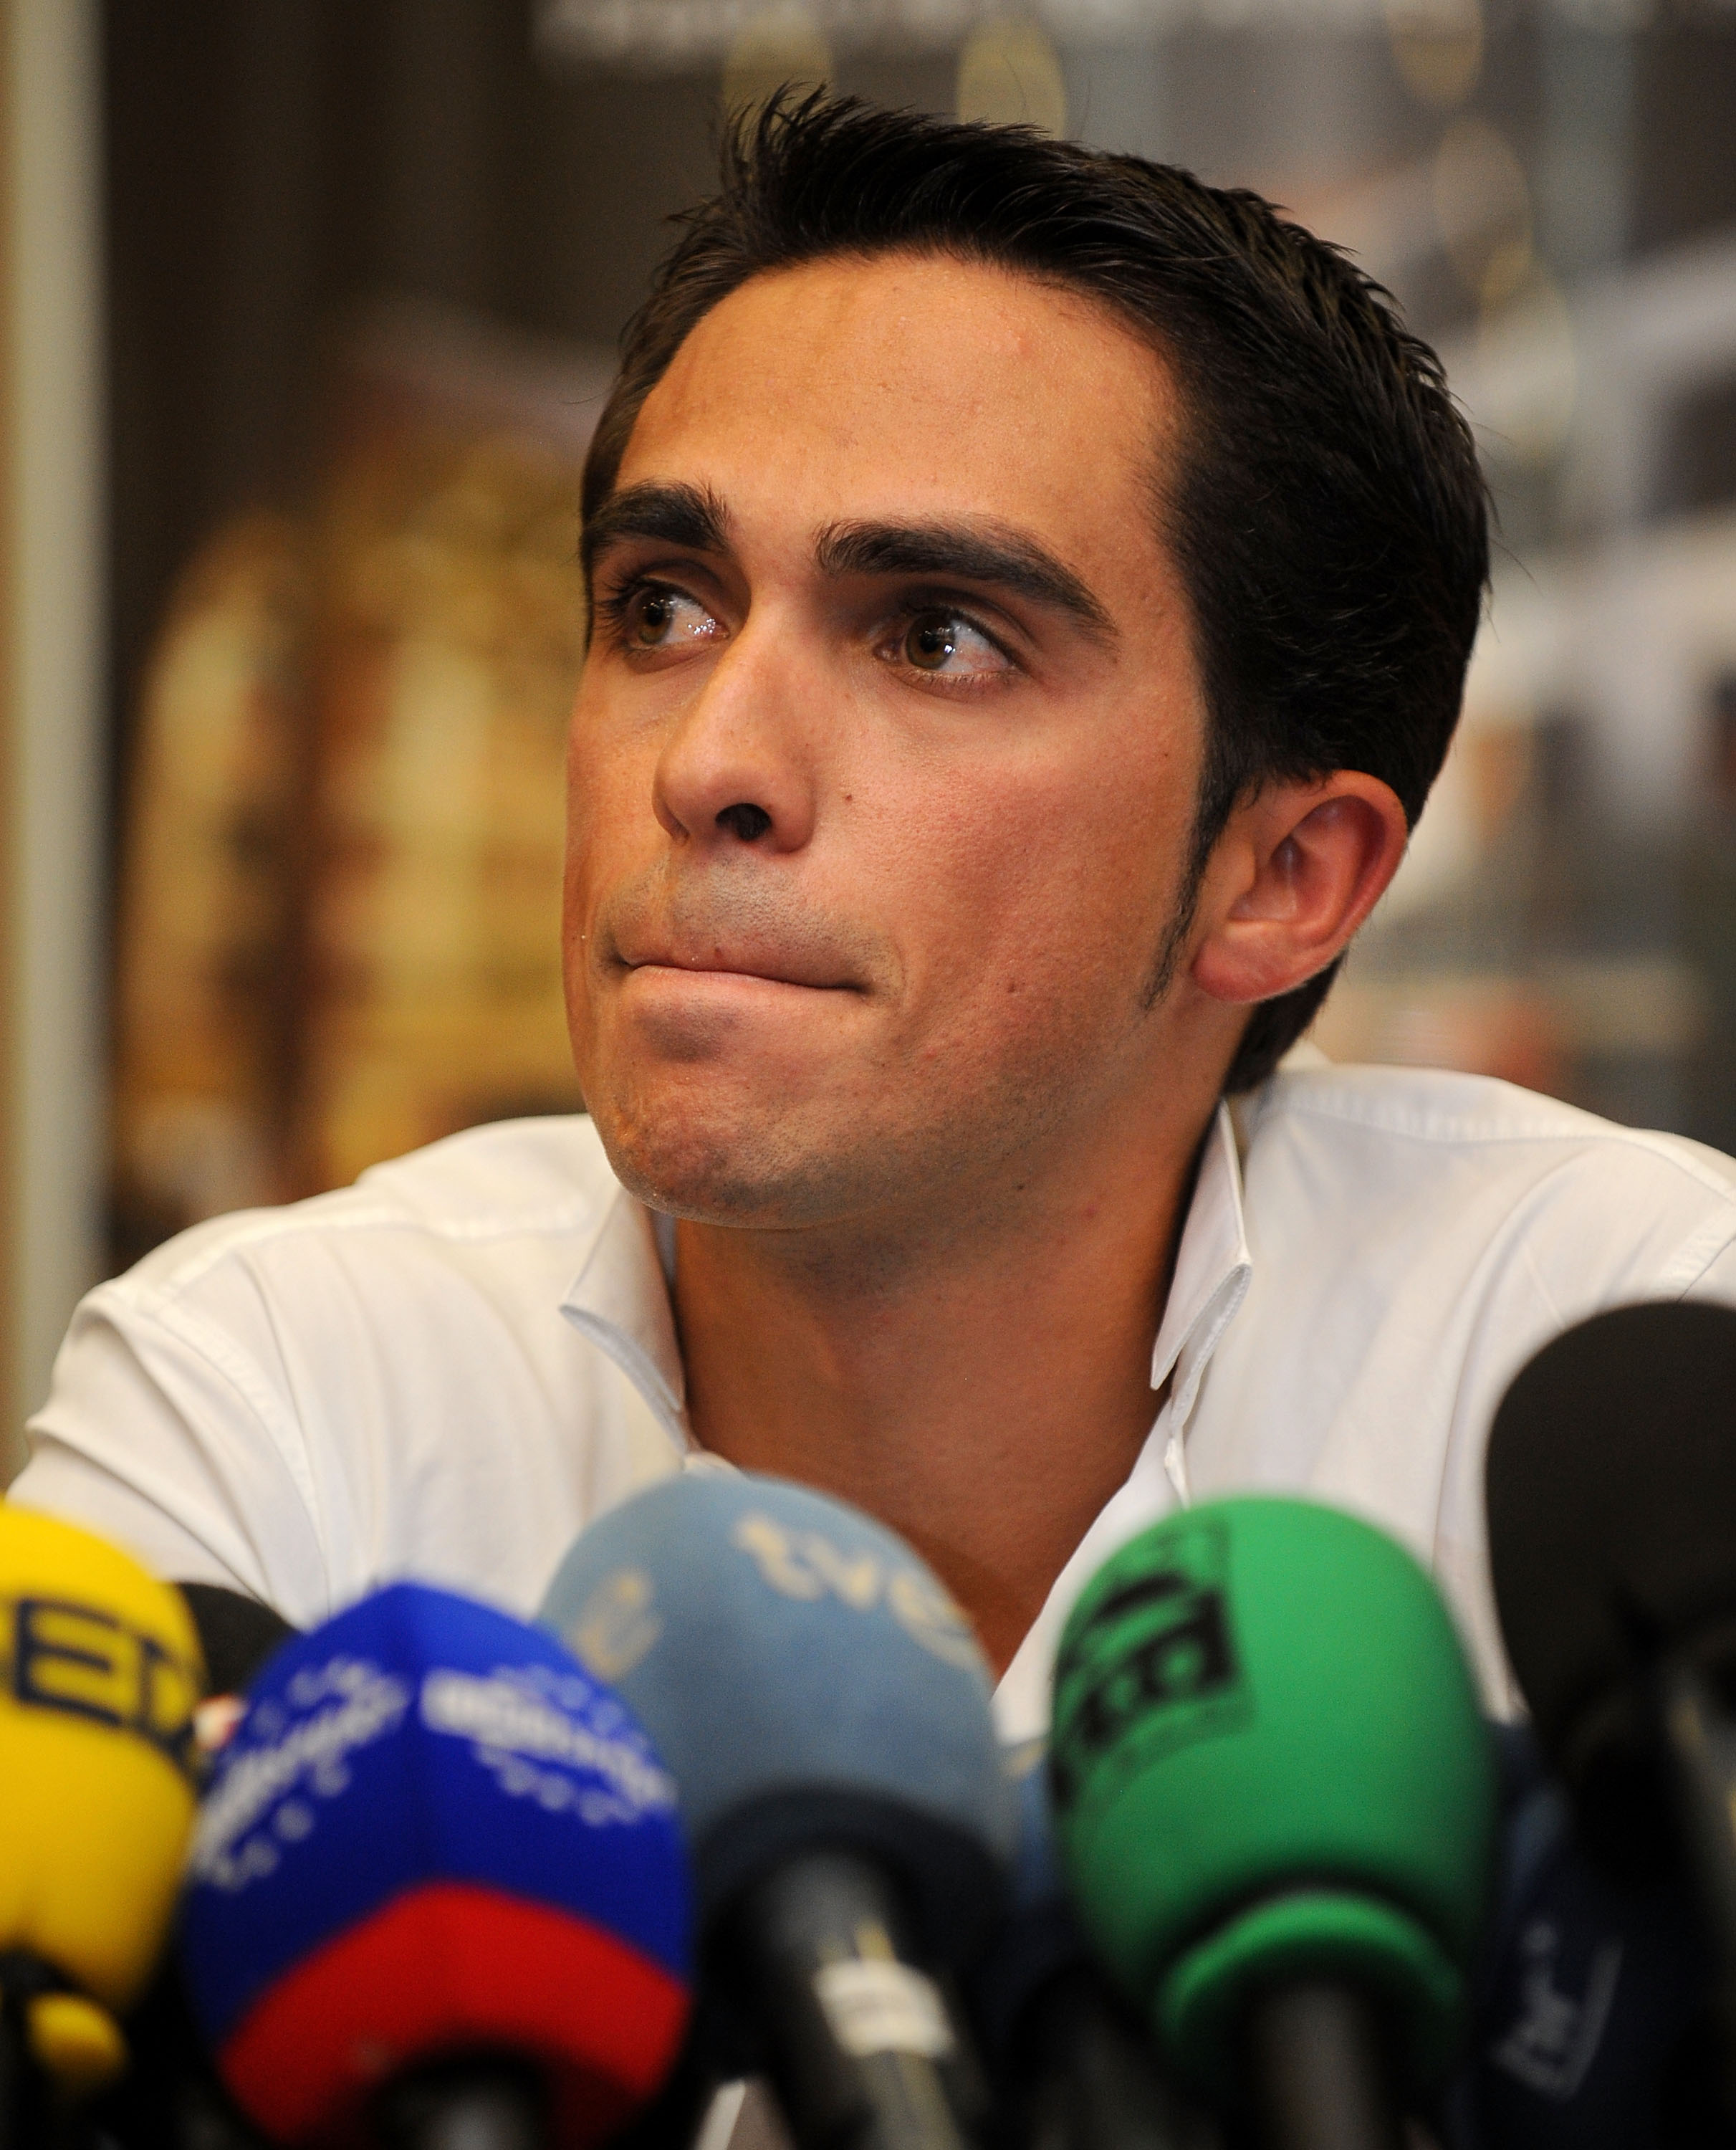 PINTO, SPAIN - SEPTEMBER 30:  Alberto Contador listens to questions from the media during his press conference pleading his innocence after being tested positive for clenbuterol, a fat-burning and muscle-building drug, during this year's Tour de France, o